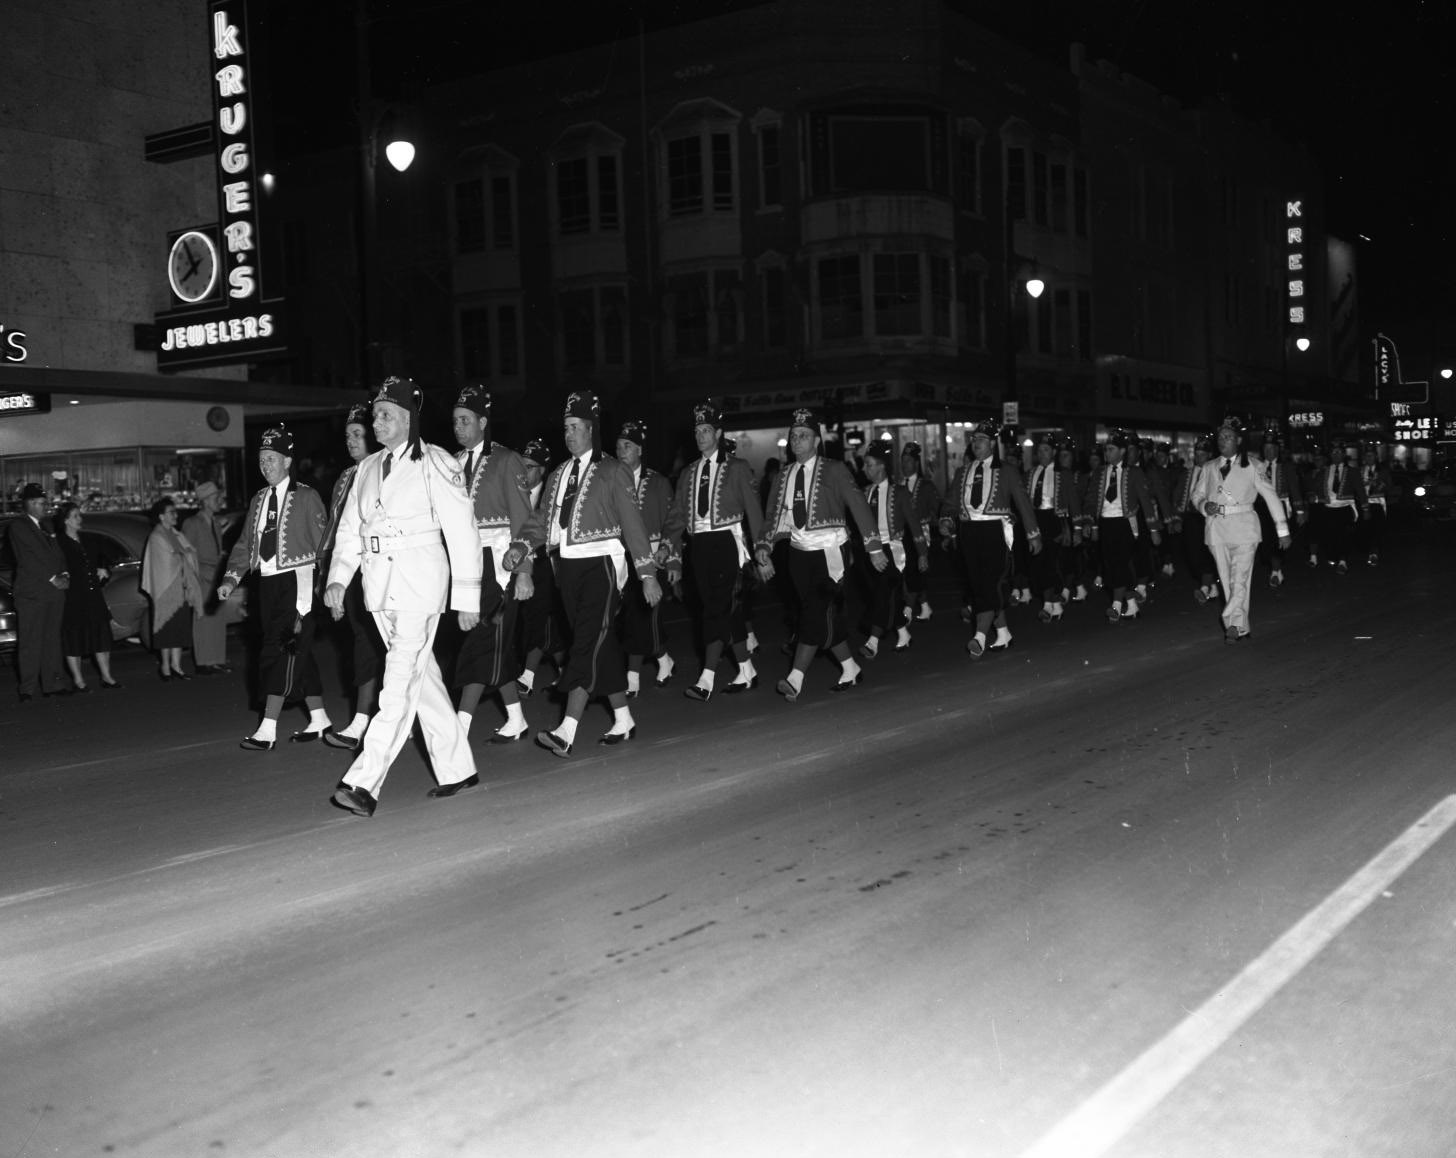 Shriners Marching in Parade, Austin, Texas, 1956.